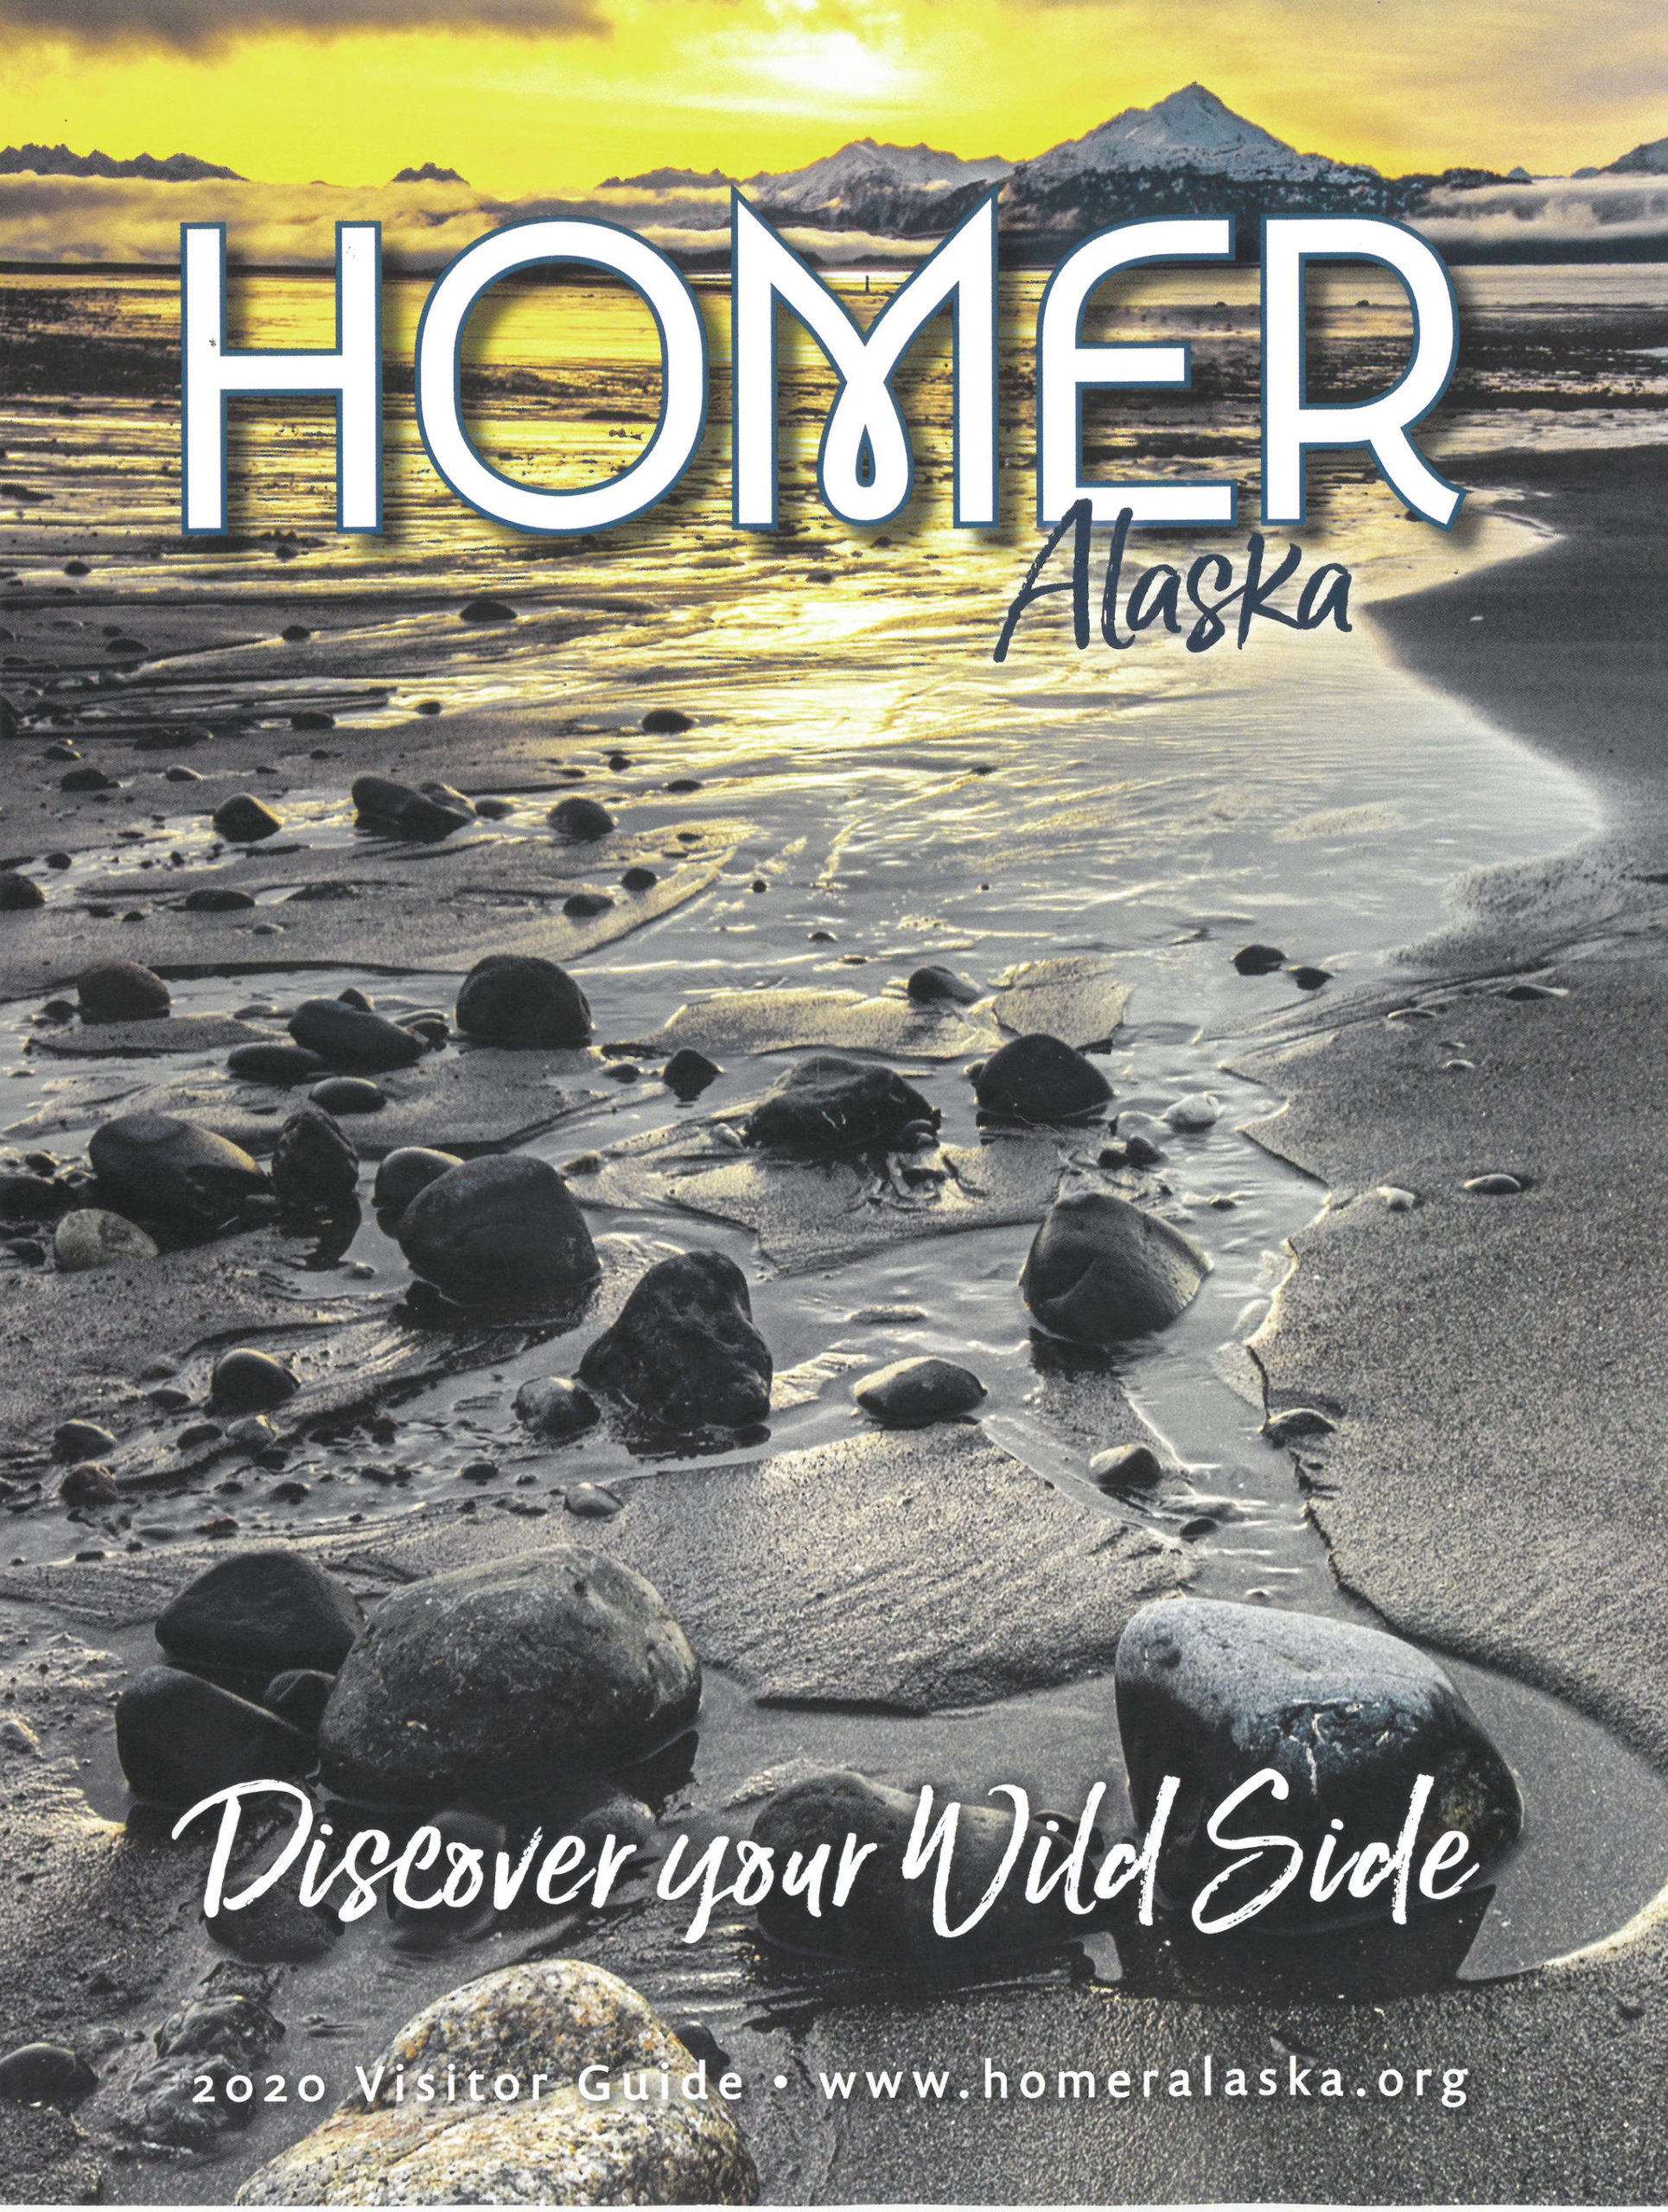 The cover of the Homer Chamber of Commerce and Visitor Center 2020 Visitor Guide was released at the chamber’s annual meeting on Jan. 21, 2020, at the Alaska Islands and Ocean Visitor Center in Homer, Alaska. Edward L. Marsh took the photo on the cover. (Photo courtesy Homer Chamber of Commerce and Visitor Center)